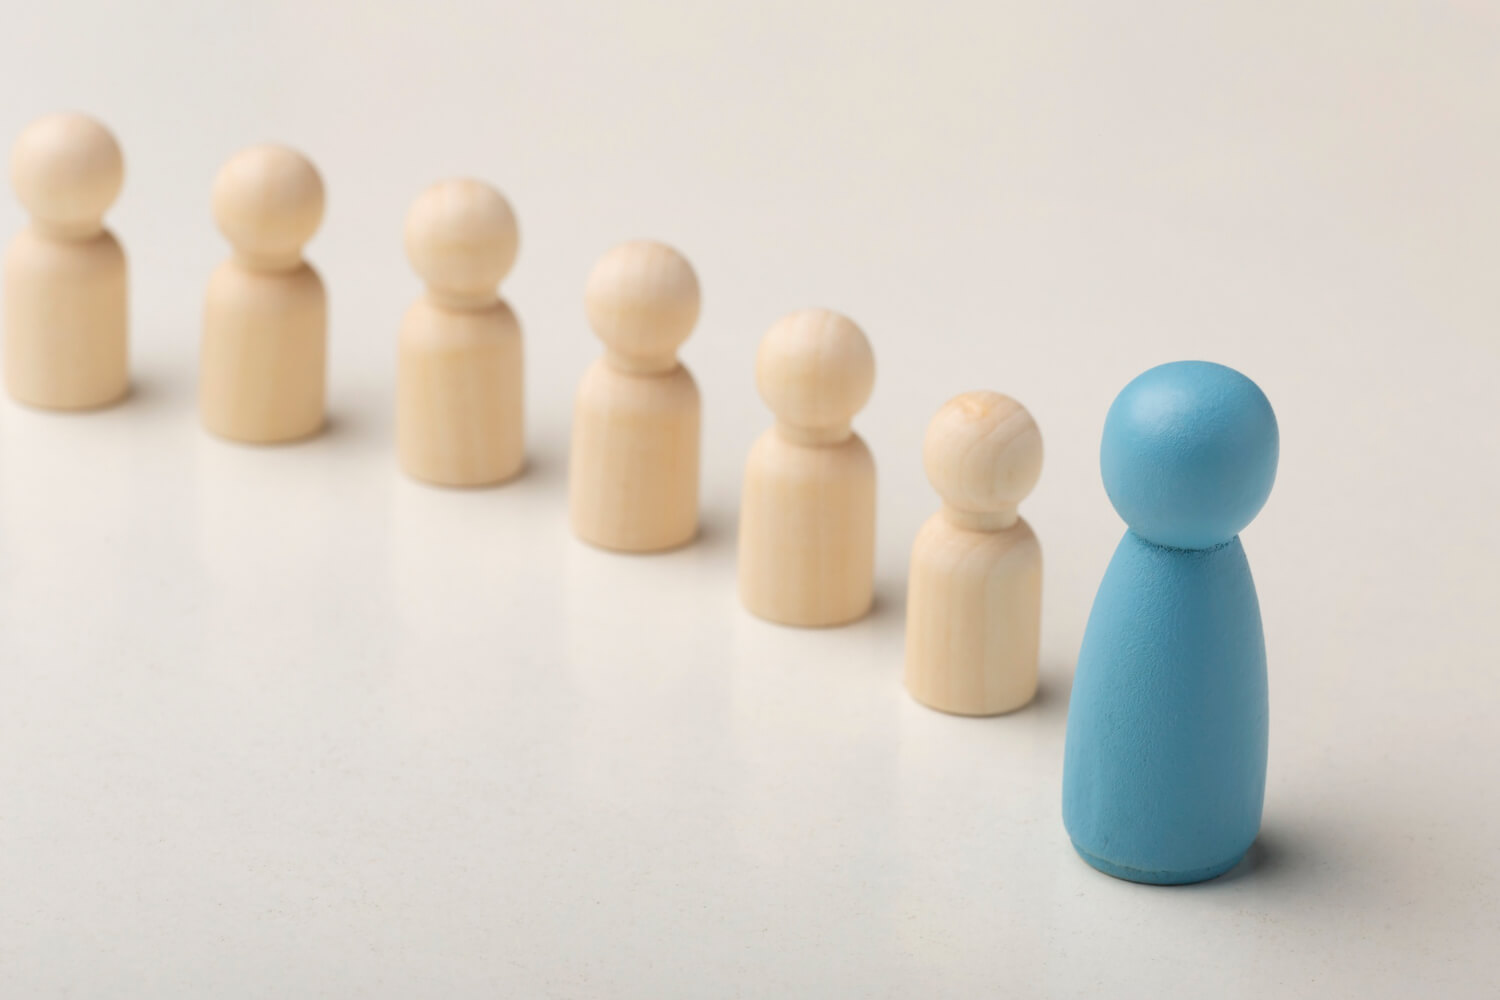 A blue pawn leading the other pawns